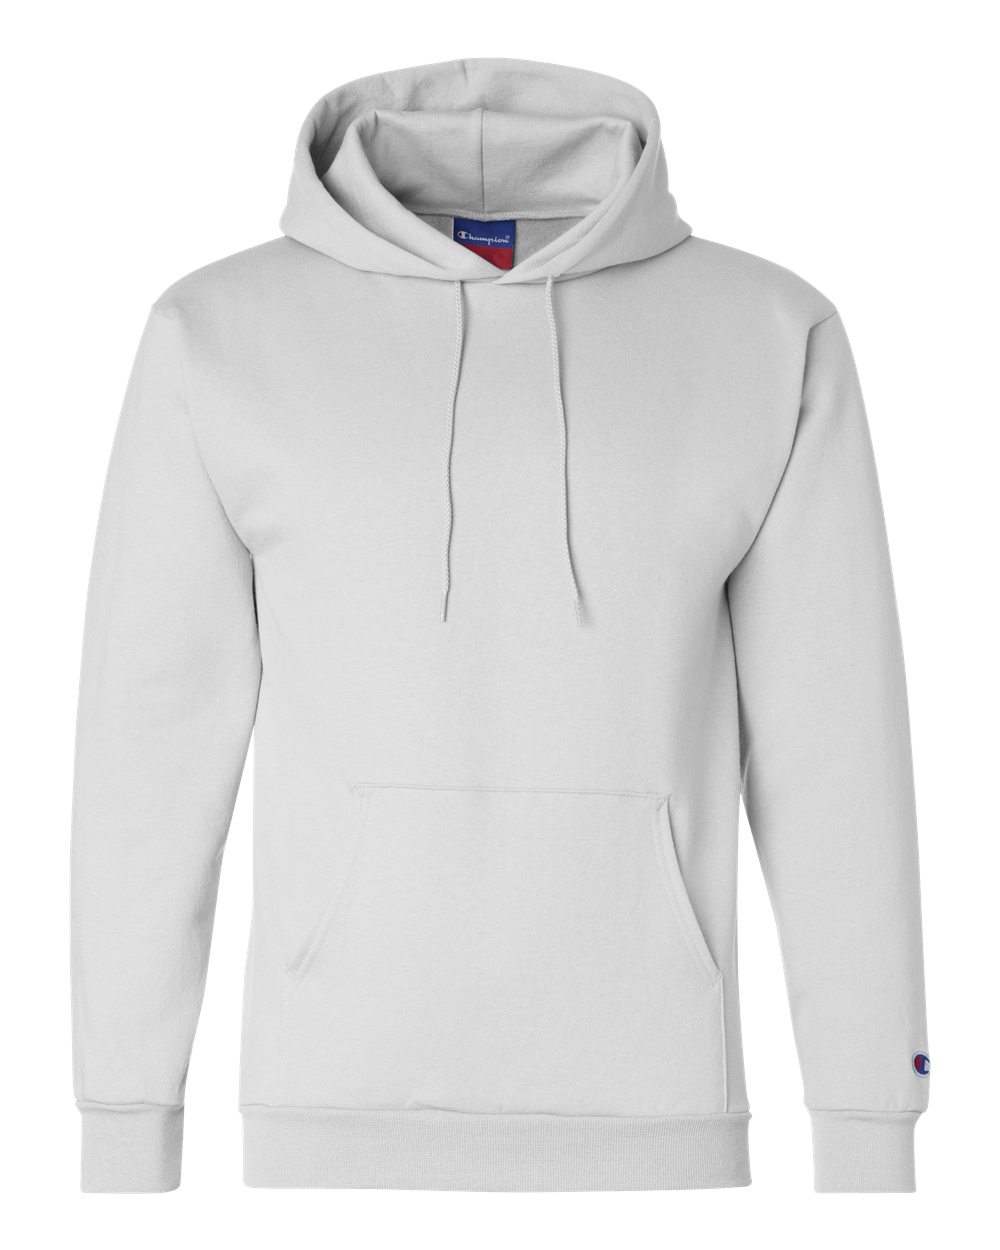 Powerblend® Hooded - S700 | Clothing Shop Online